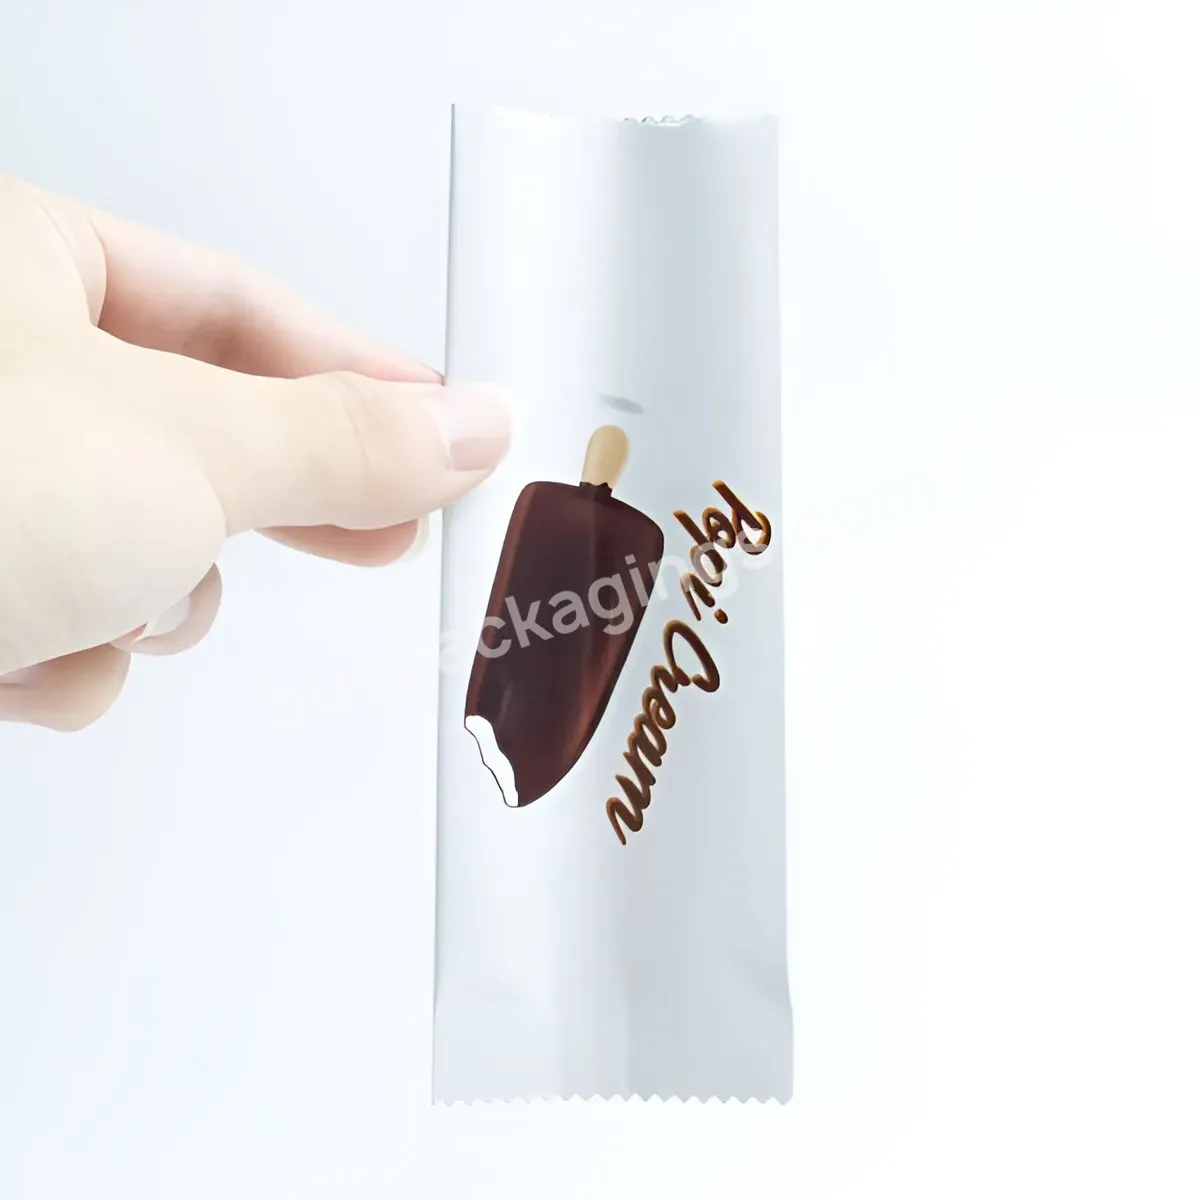 Custom Printed Candy Wrapper Honey Sticks Packets Plastic Sugar Sachet Instant Coffee Tea Packaging Bags - Buy Edible Bags Customized Male Enhancement Packaging,Enhancement Royal Honey Plus Packaging Capsule With Plastic Bags,Royal Honey Packaging.